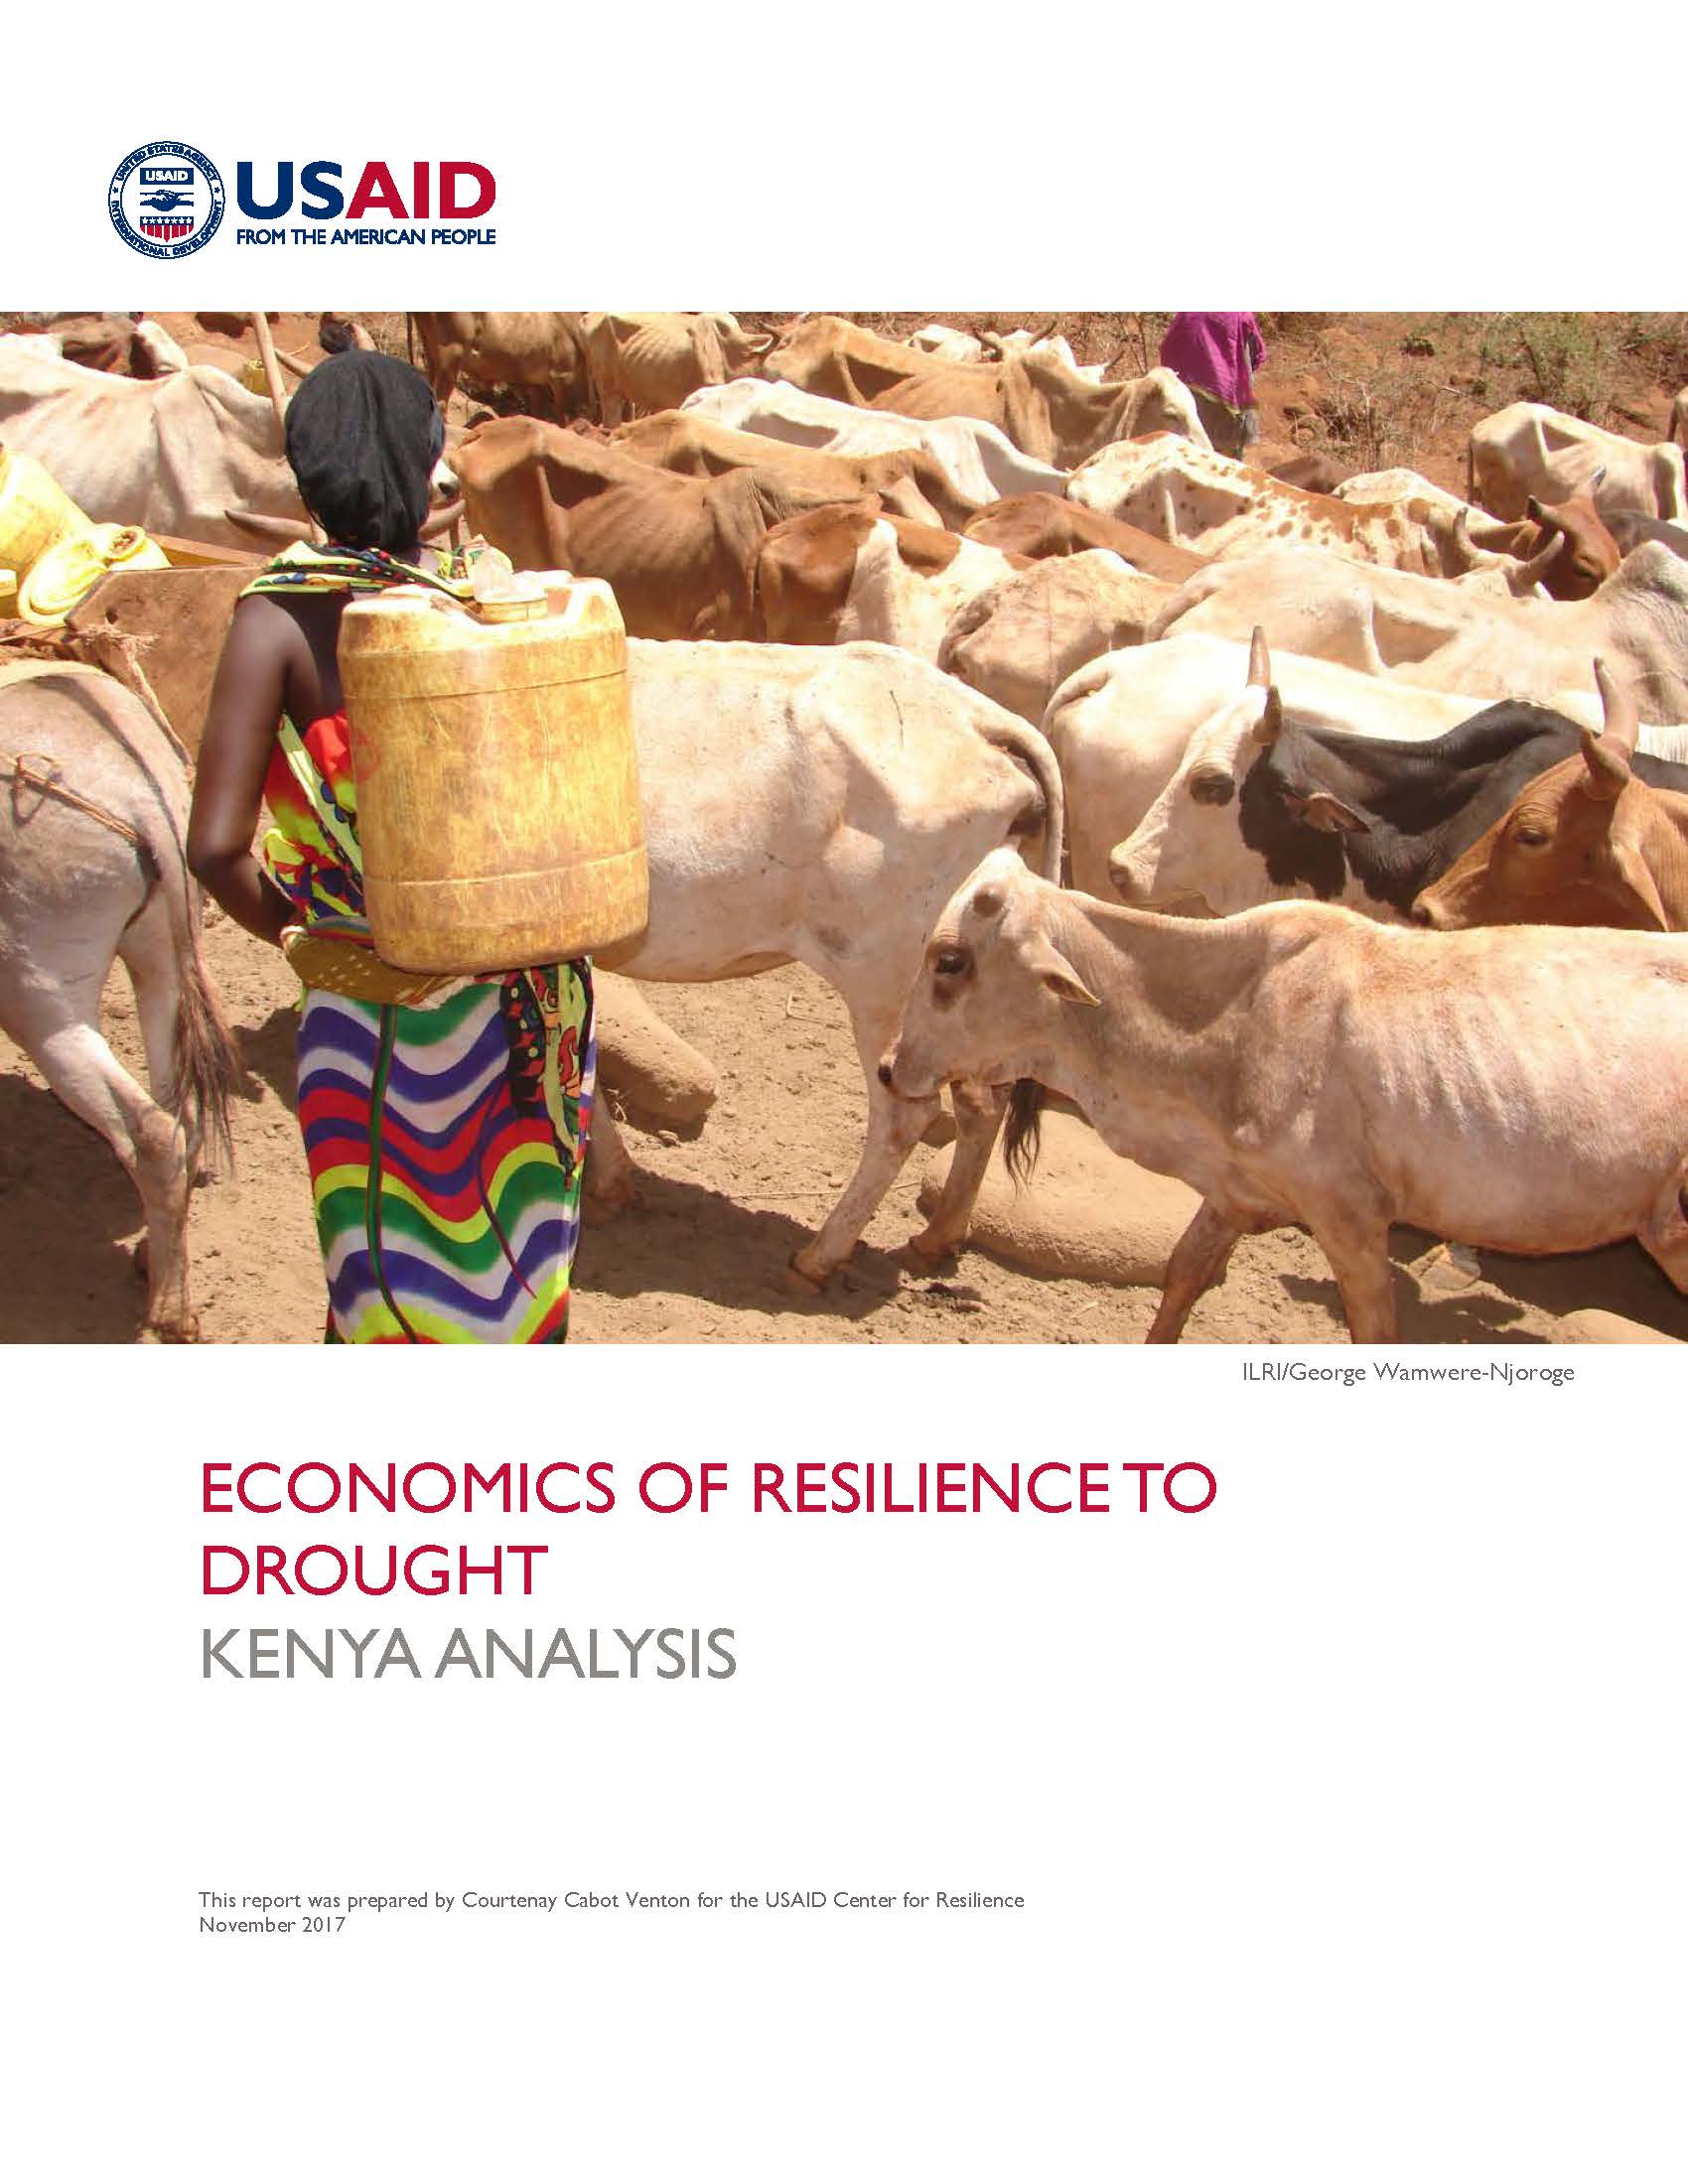 Economics of Resilience to Drought in Kenya